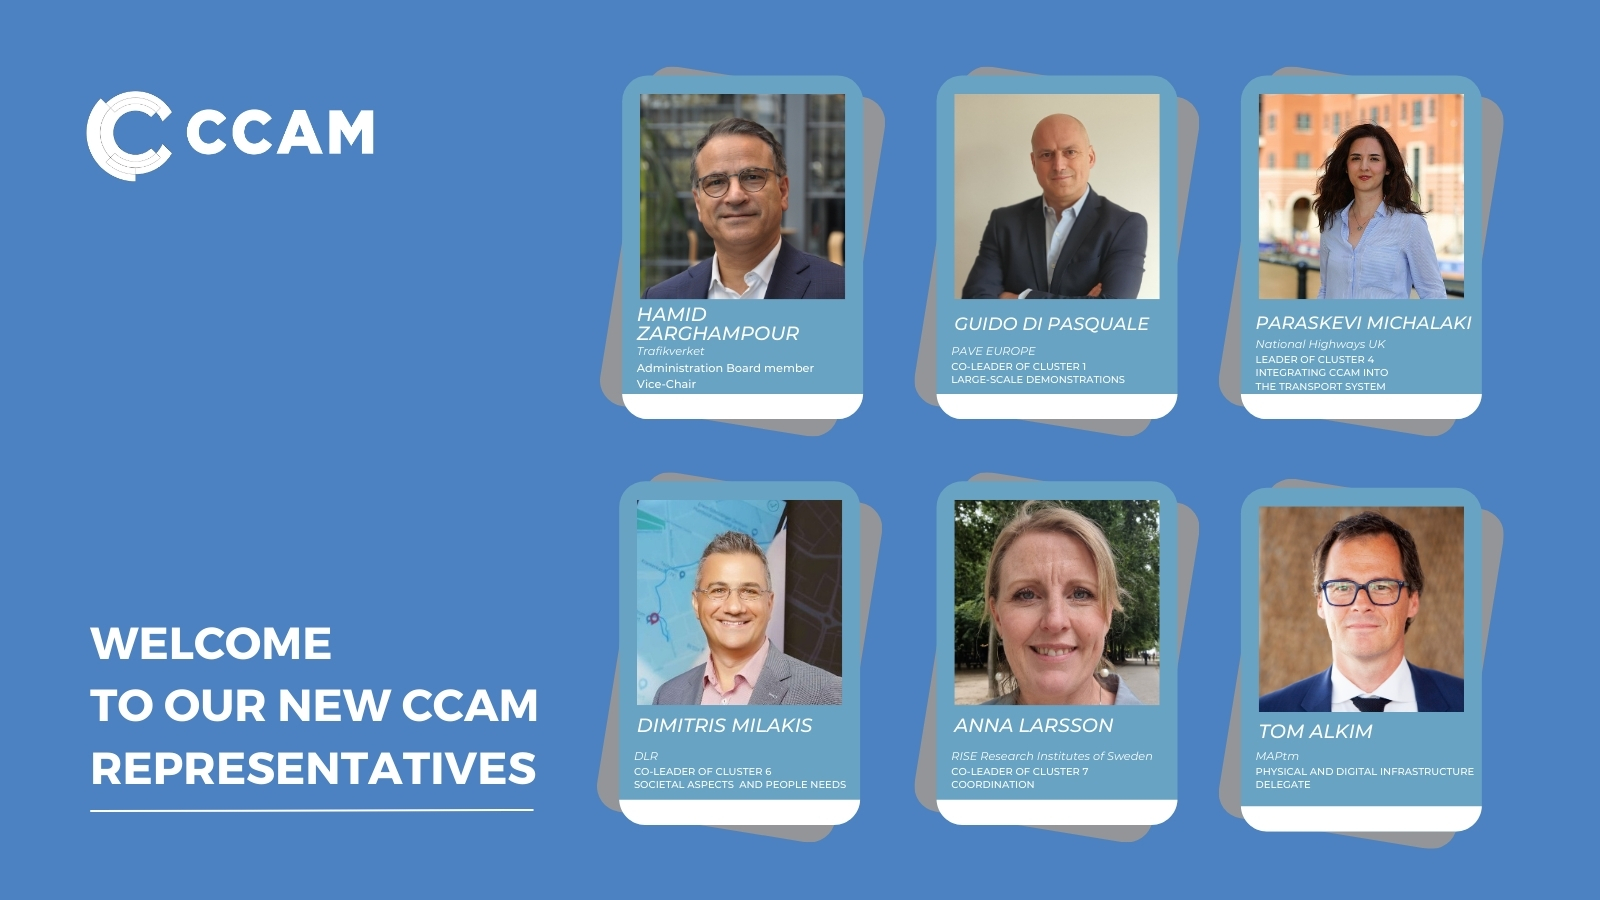 Welcome to our latest new CCAM members